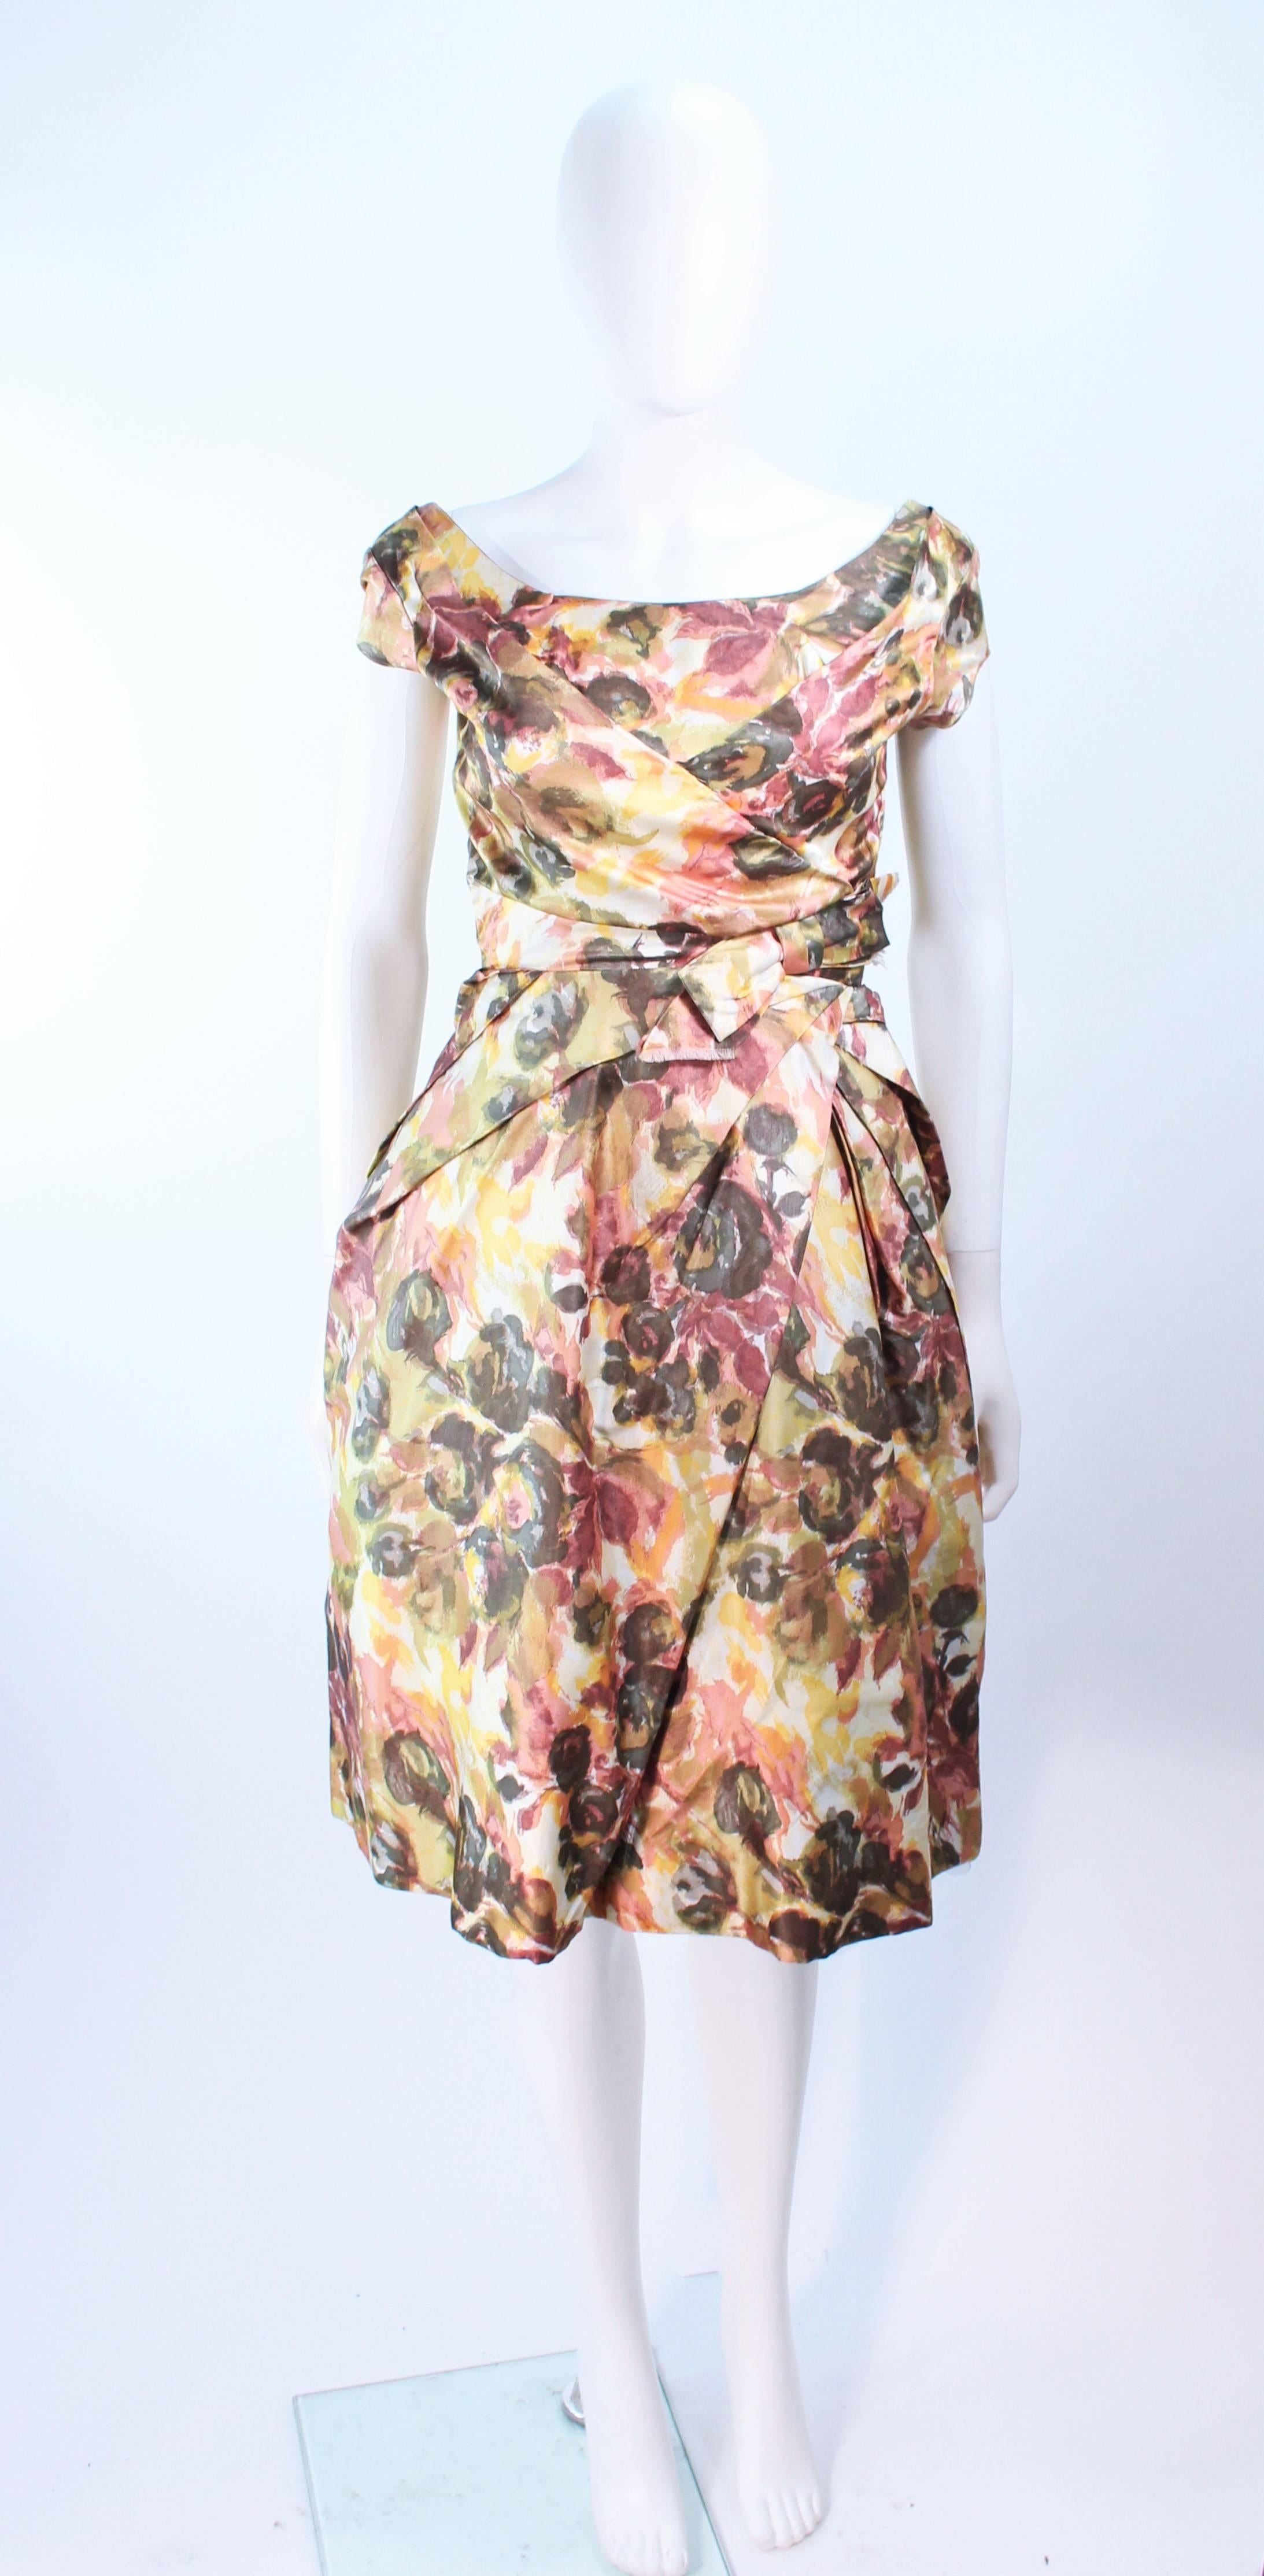 This vintage cocktail dress is composed of a floral watercolor pattern silk in Earth tone hues. Features a draped bow design at the waist. There is a center back zipper closure. (The cocktail dress, due to its small size, was unable to completely